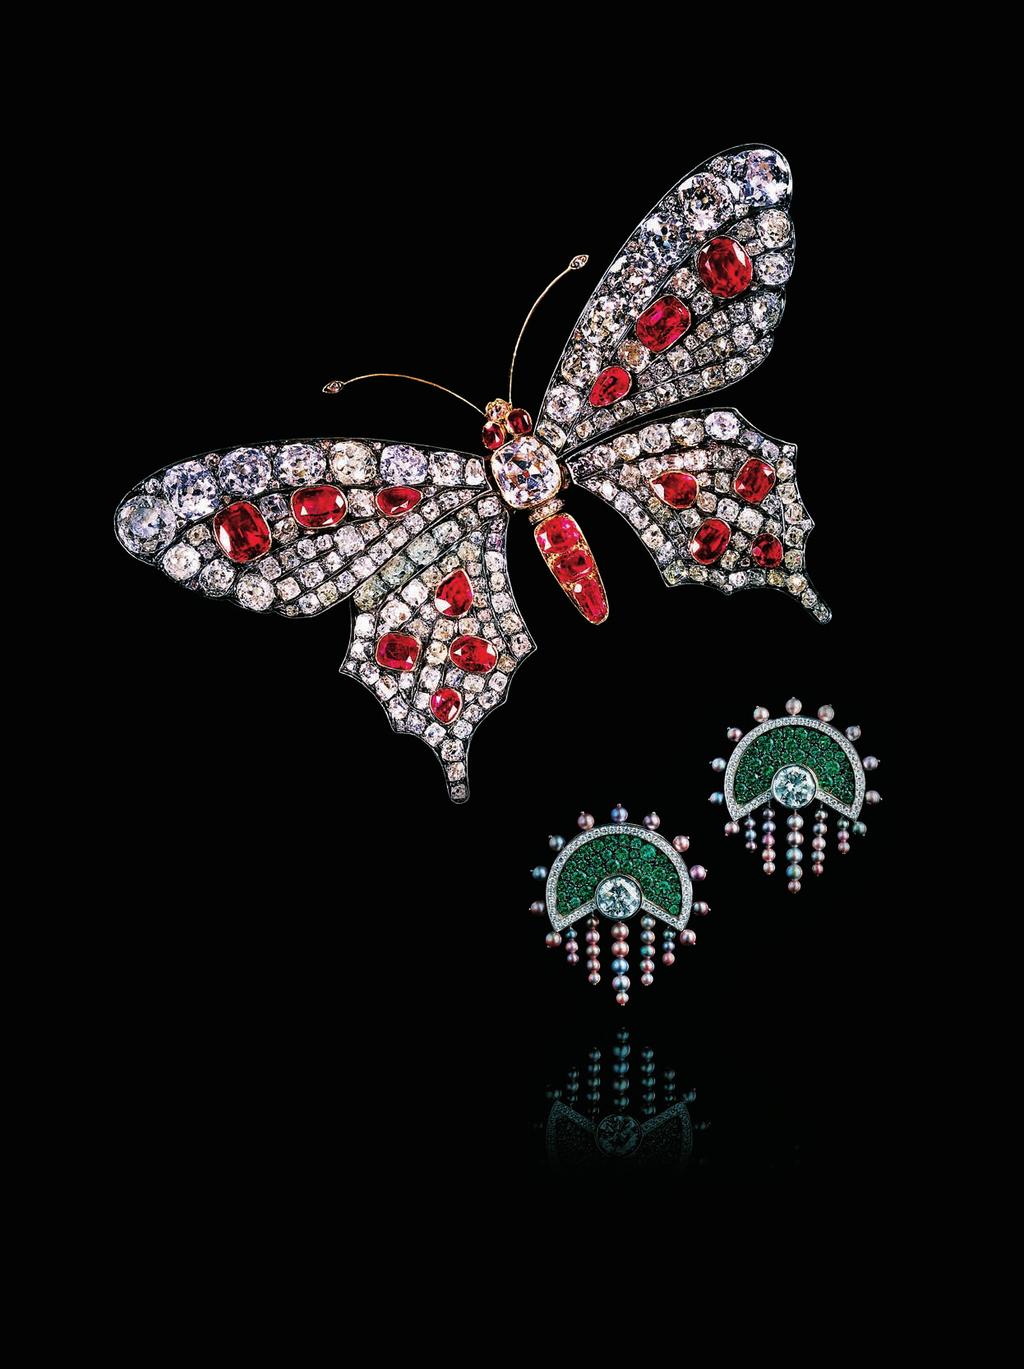 Faerber Butterfly brooch. GEM GENEVE: DAWN OF A NEW ERA Oselieri Racine earrings with diamonds, emeralds and natural pearls set in white and blackened gold.